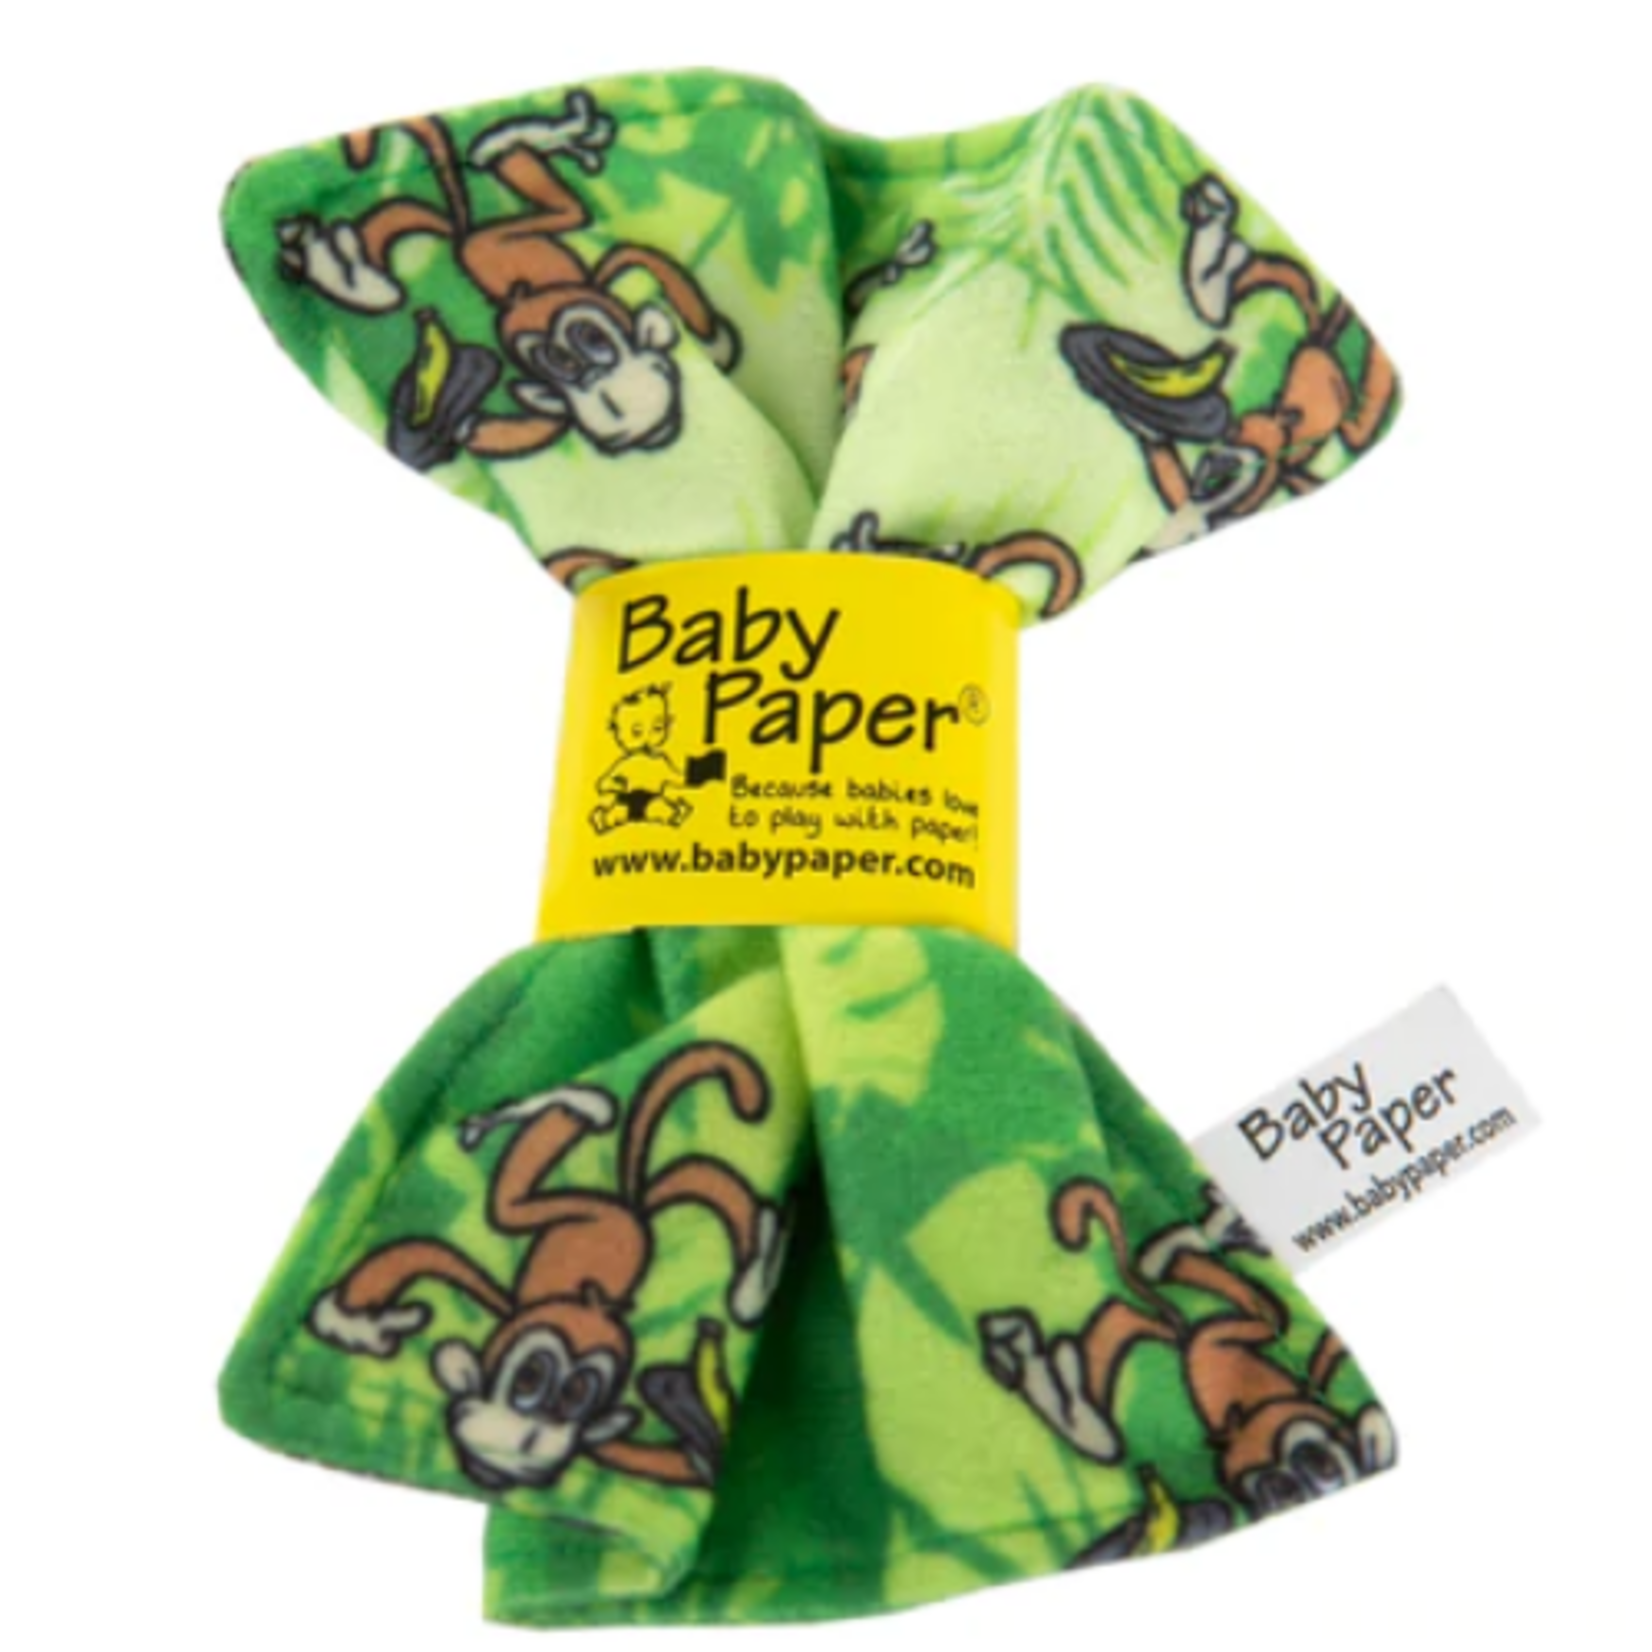 Baby Paper BABY PAPER 2